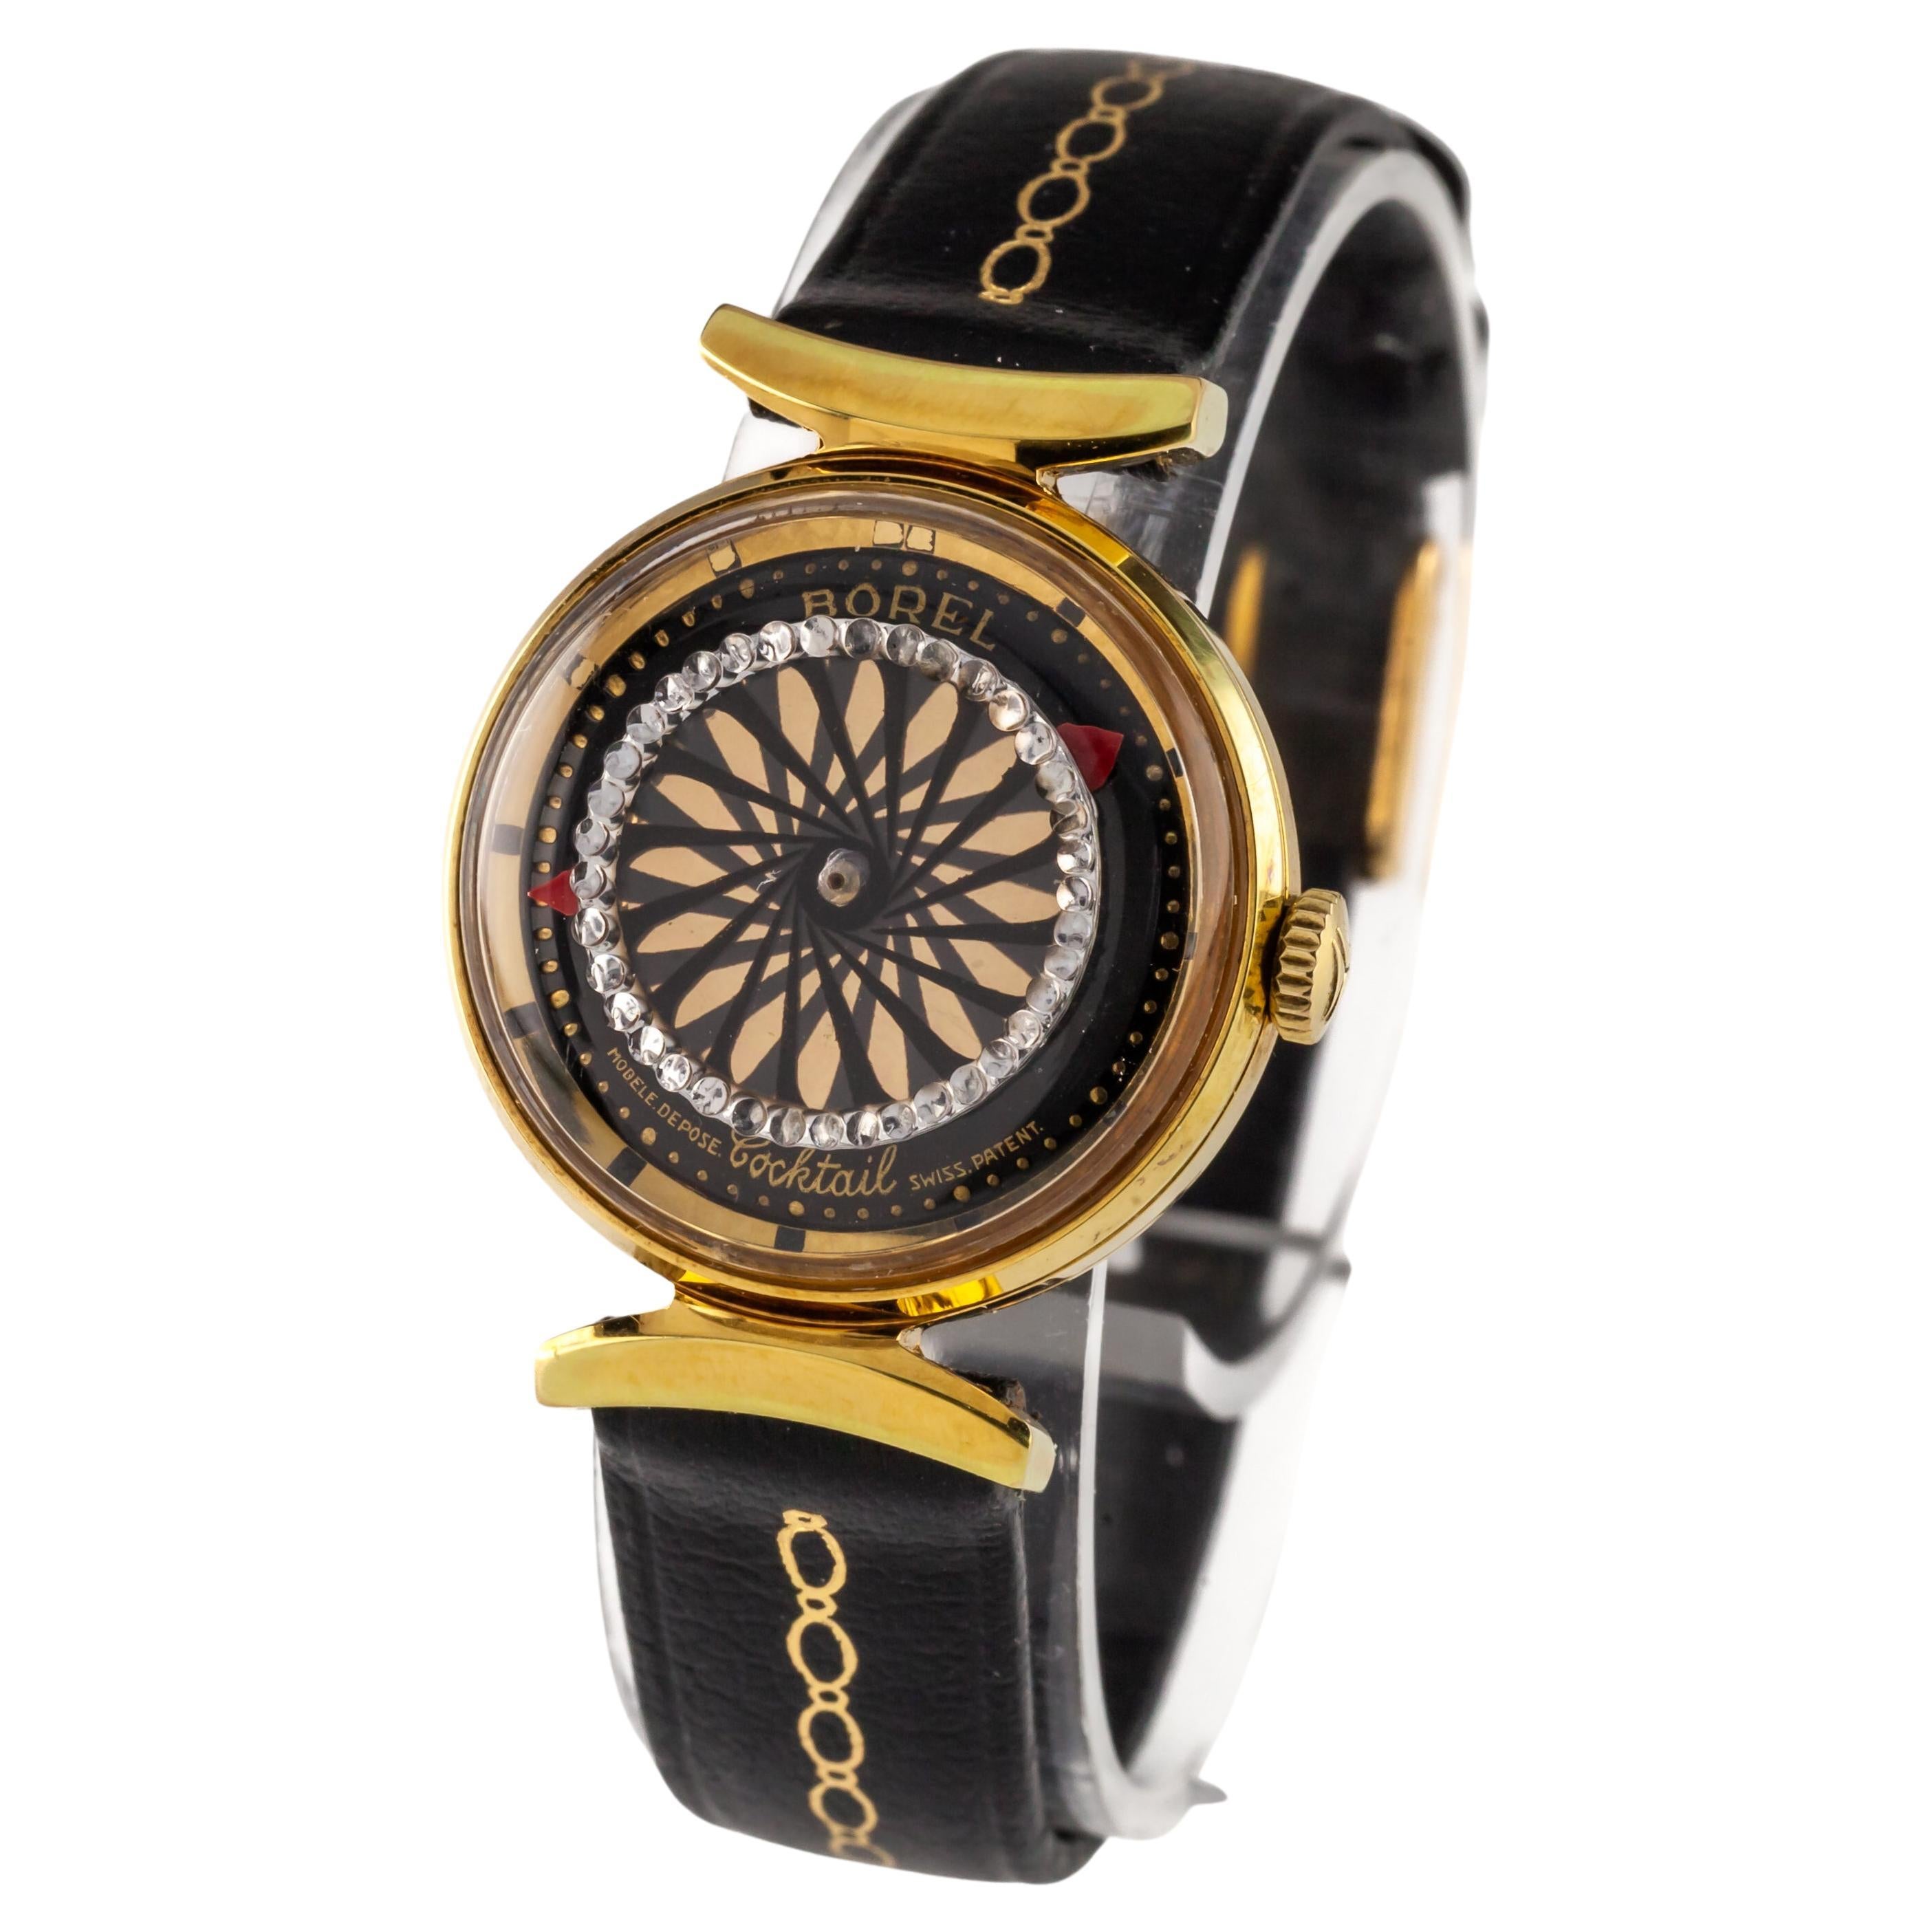 Borel Women's Gold-Plated Hand-Winding Kaleidoscope Watch w/ Crystals New Band